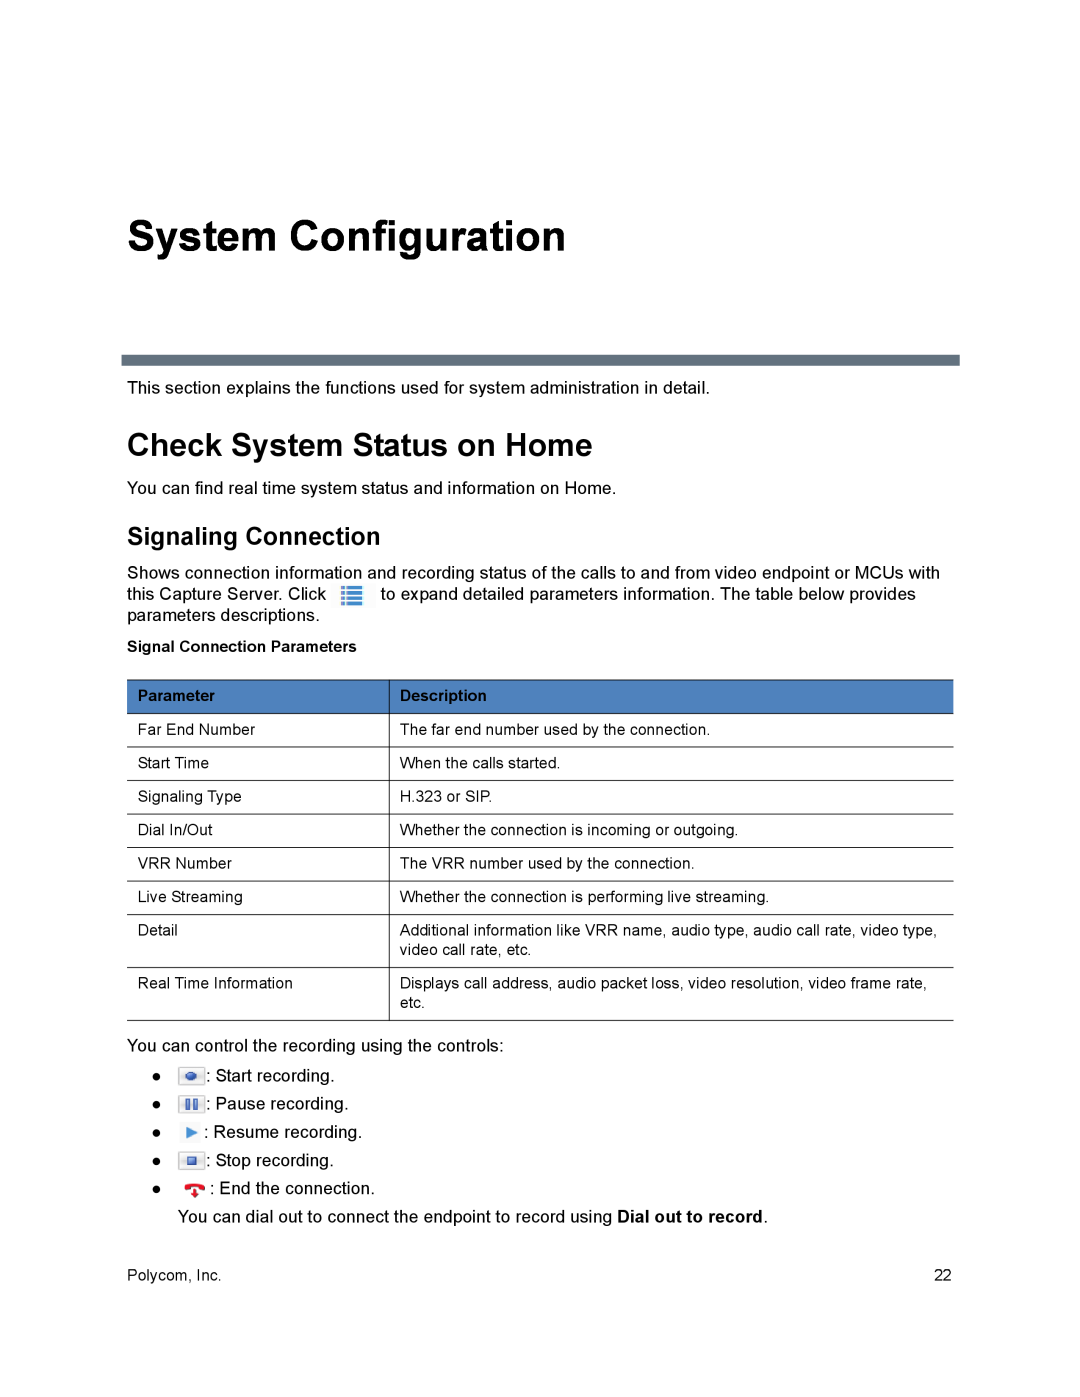 Polycom 40/0 manual System Configuration, Check System Status on Home, Signaling Connection 